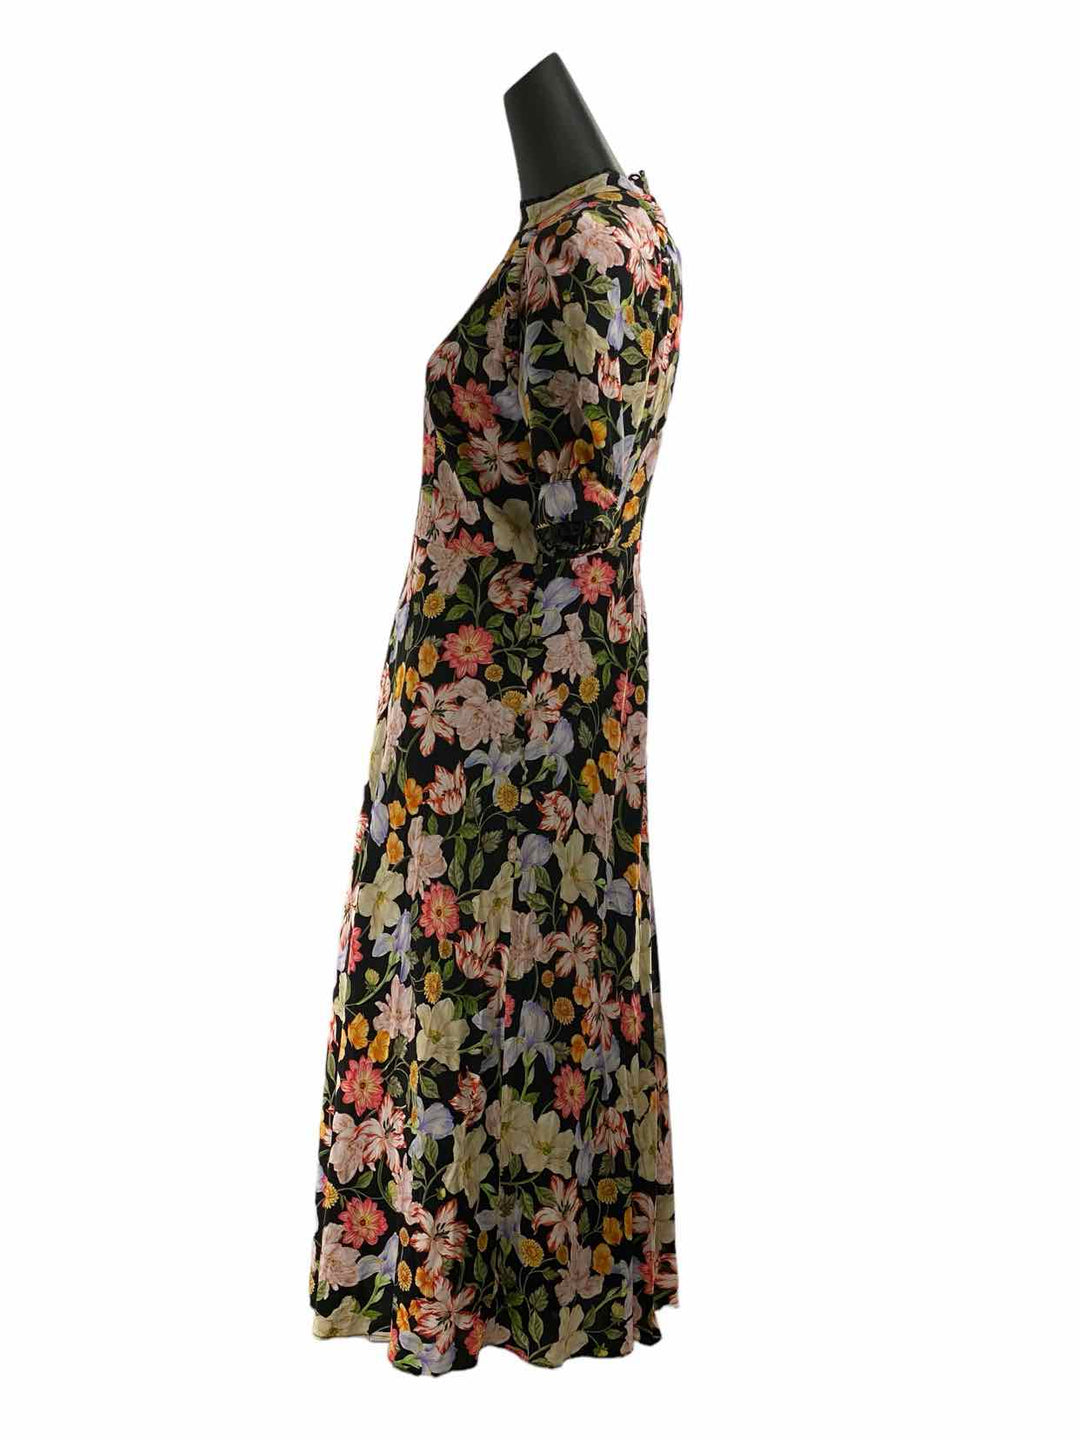 Phase Eight Size 6 Multi-Color Floral Dress